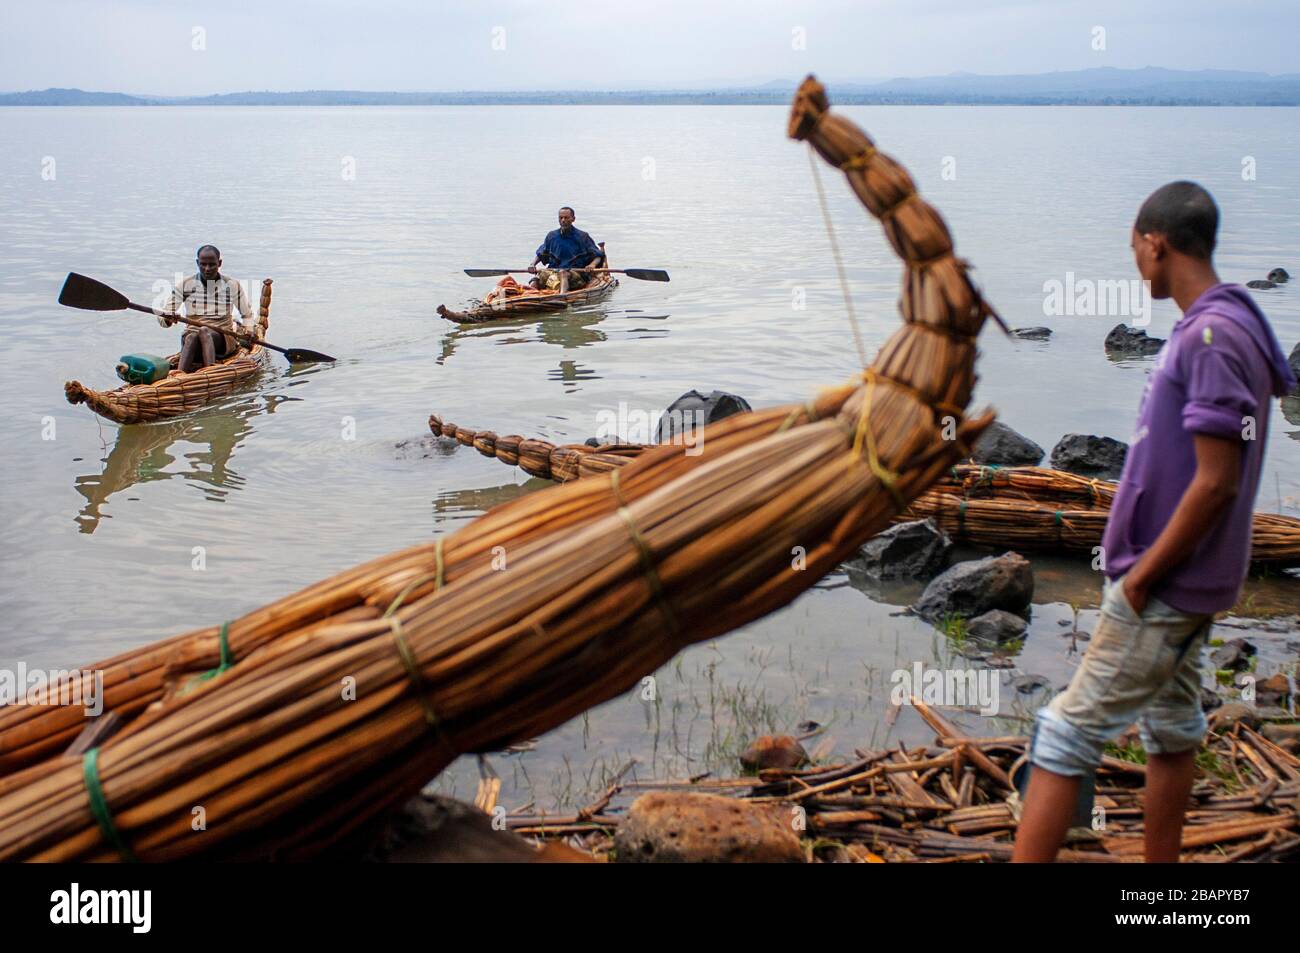 Traditional Tankwas (reed boats) on the banks of Lake Tana. A young fisherman with his canoe on Lake Tana in Bahir Dah in Ethiopia. Lake Tana is the s Stock Photo